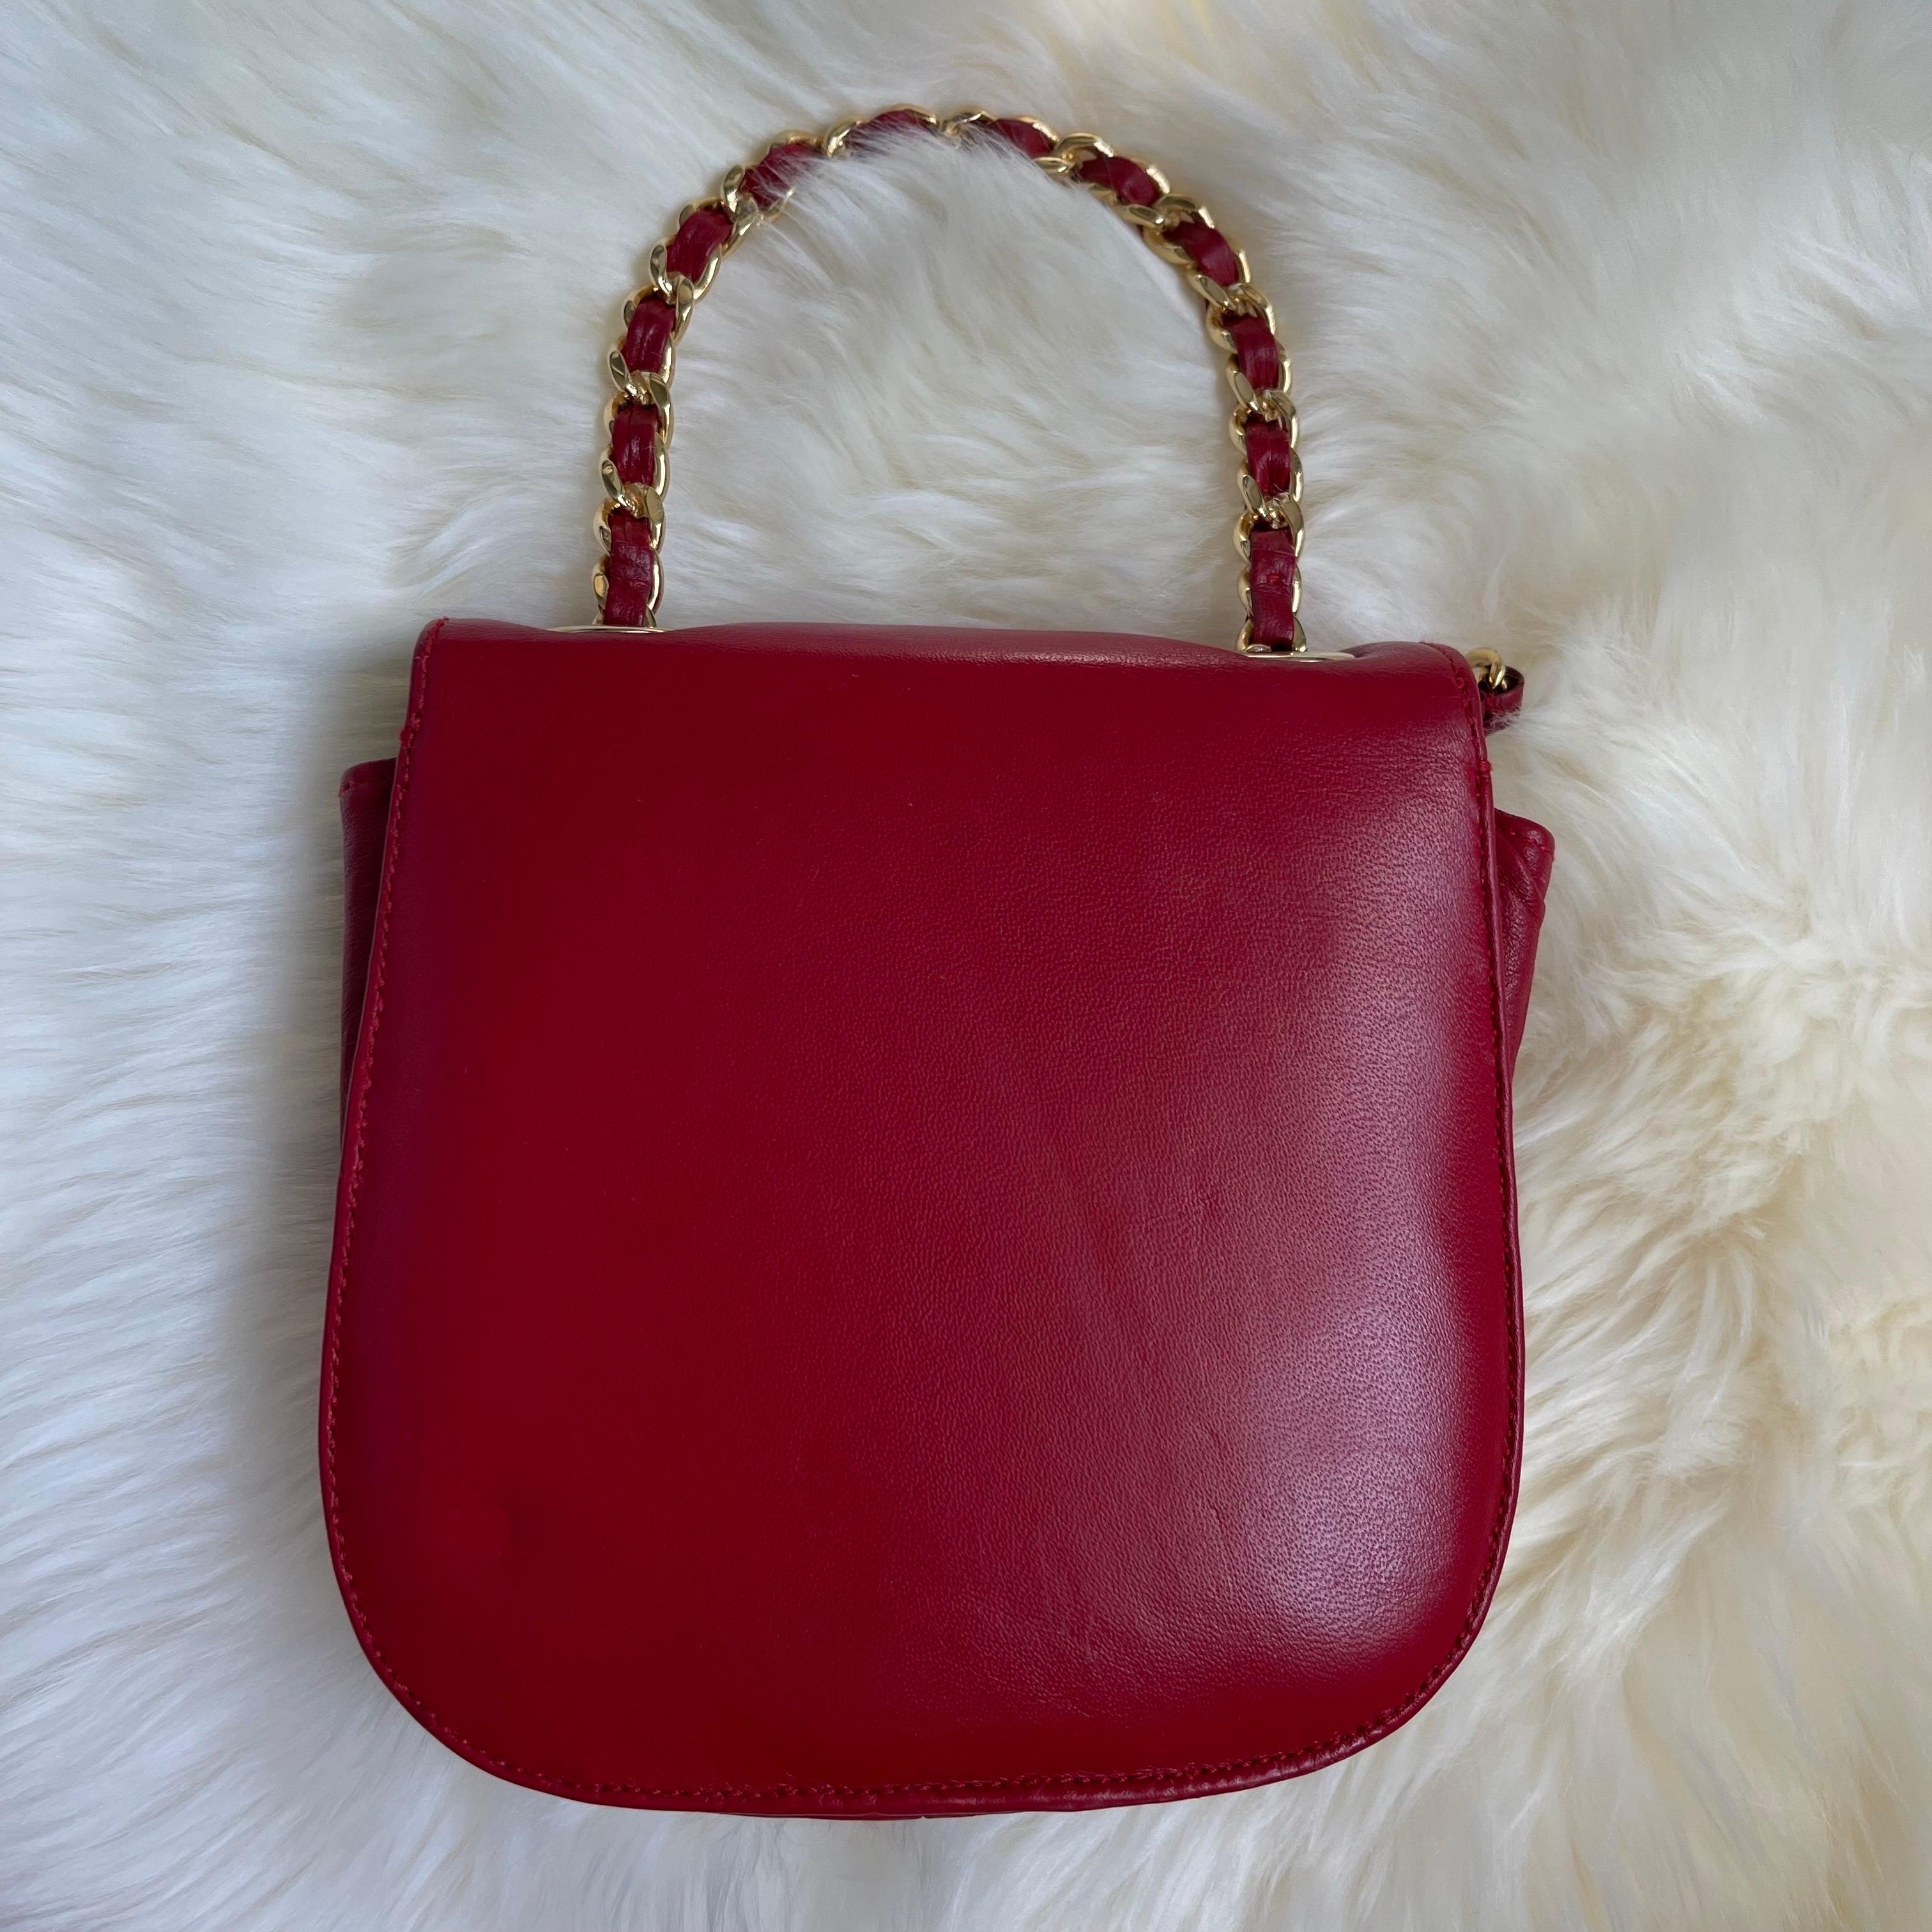 🖤 Vintage 90s Chanel Red Top Handle Bag 🖤

Stunning red leather top handle bag, with gold hardware on the handle. Closes with snap closure. One main compartment, 2 small compartments. The perfect bag for the night out! 

Wear it as a top handle or